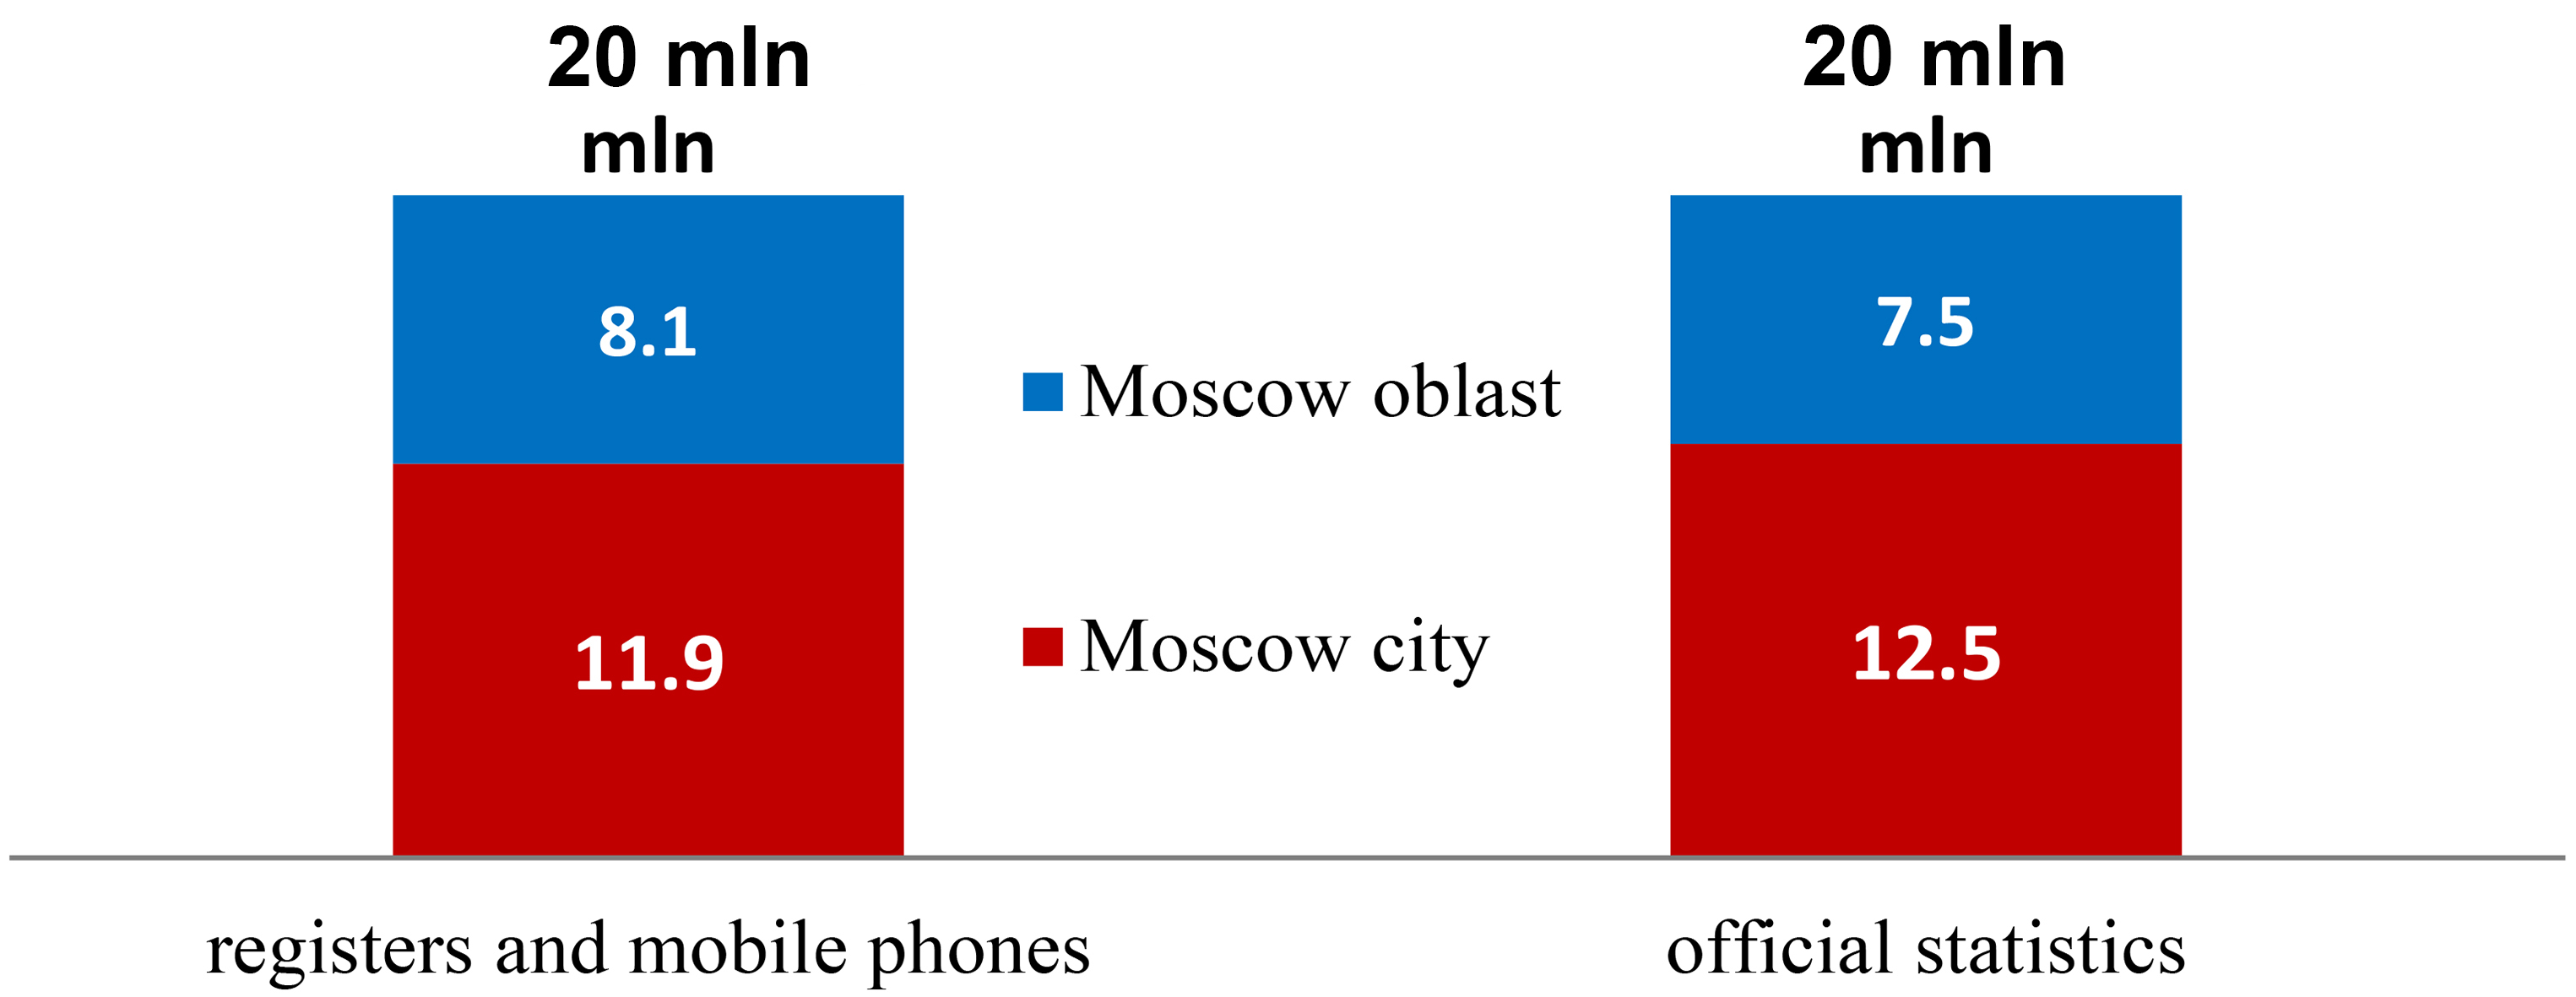 Comparison of the permanent population of Moscow and Moscow oblast based on various data sources in 2018 (in million people). Source: authors’ estimations.